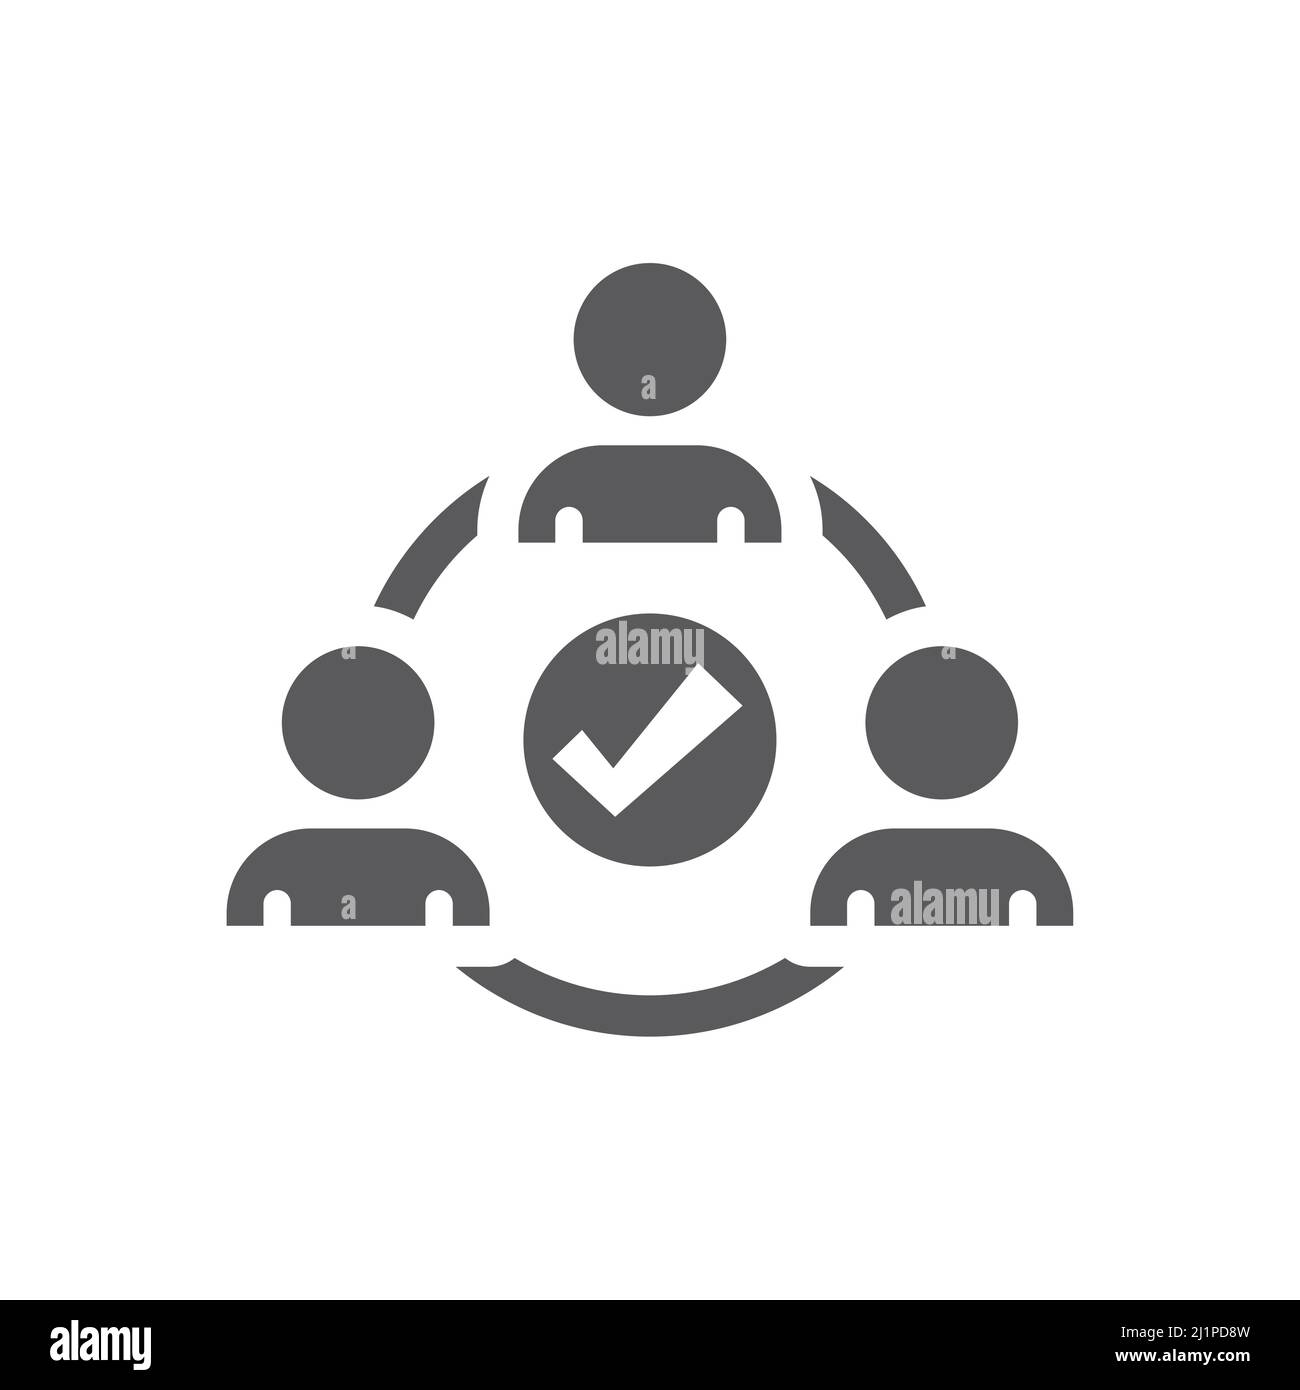 Teamwork circle with checkmark vector icon. People, employees and tick symbol. Stock Vector